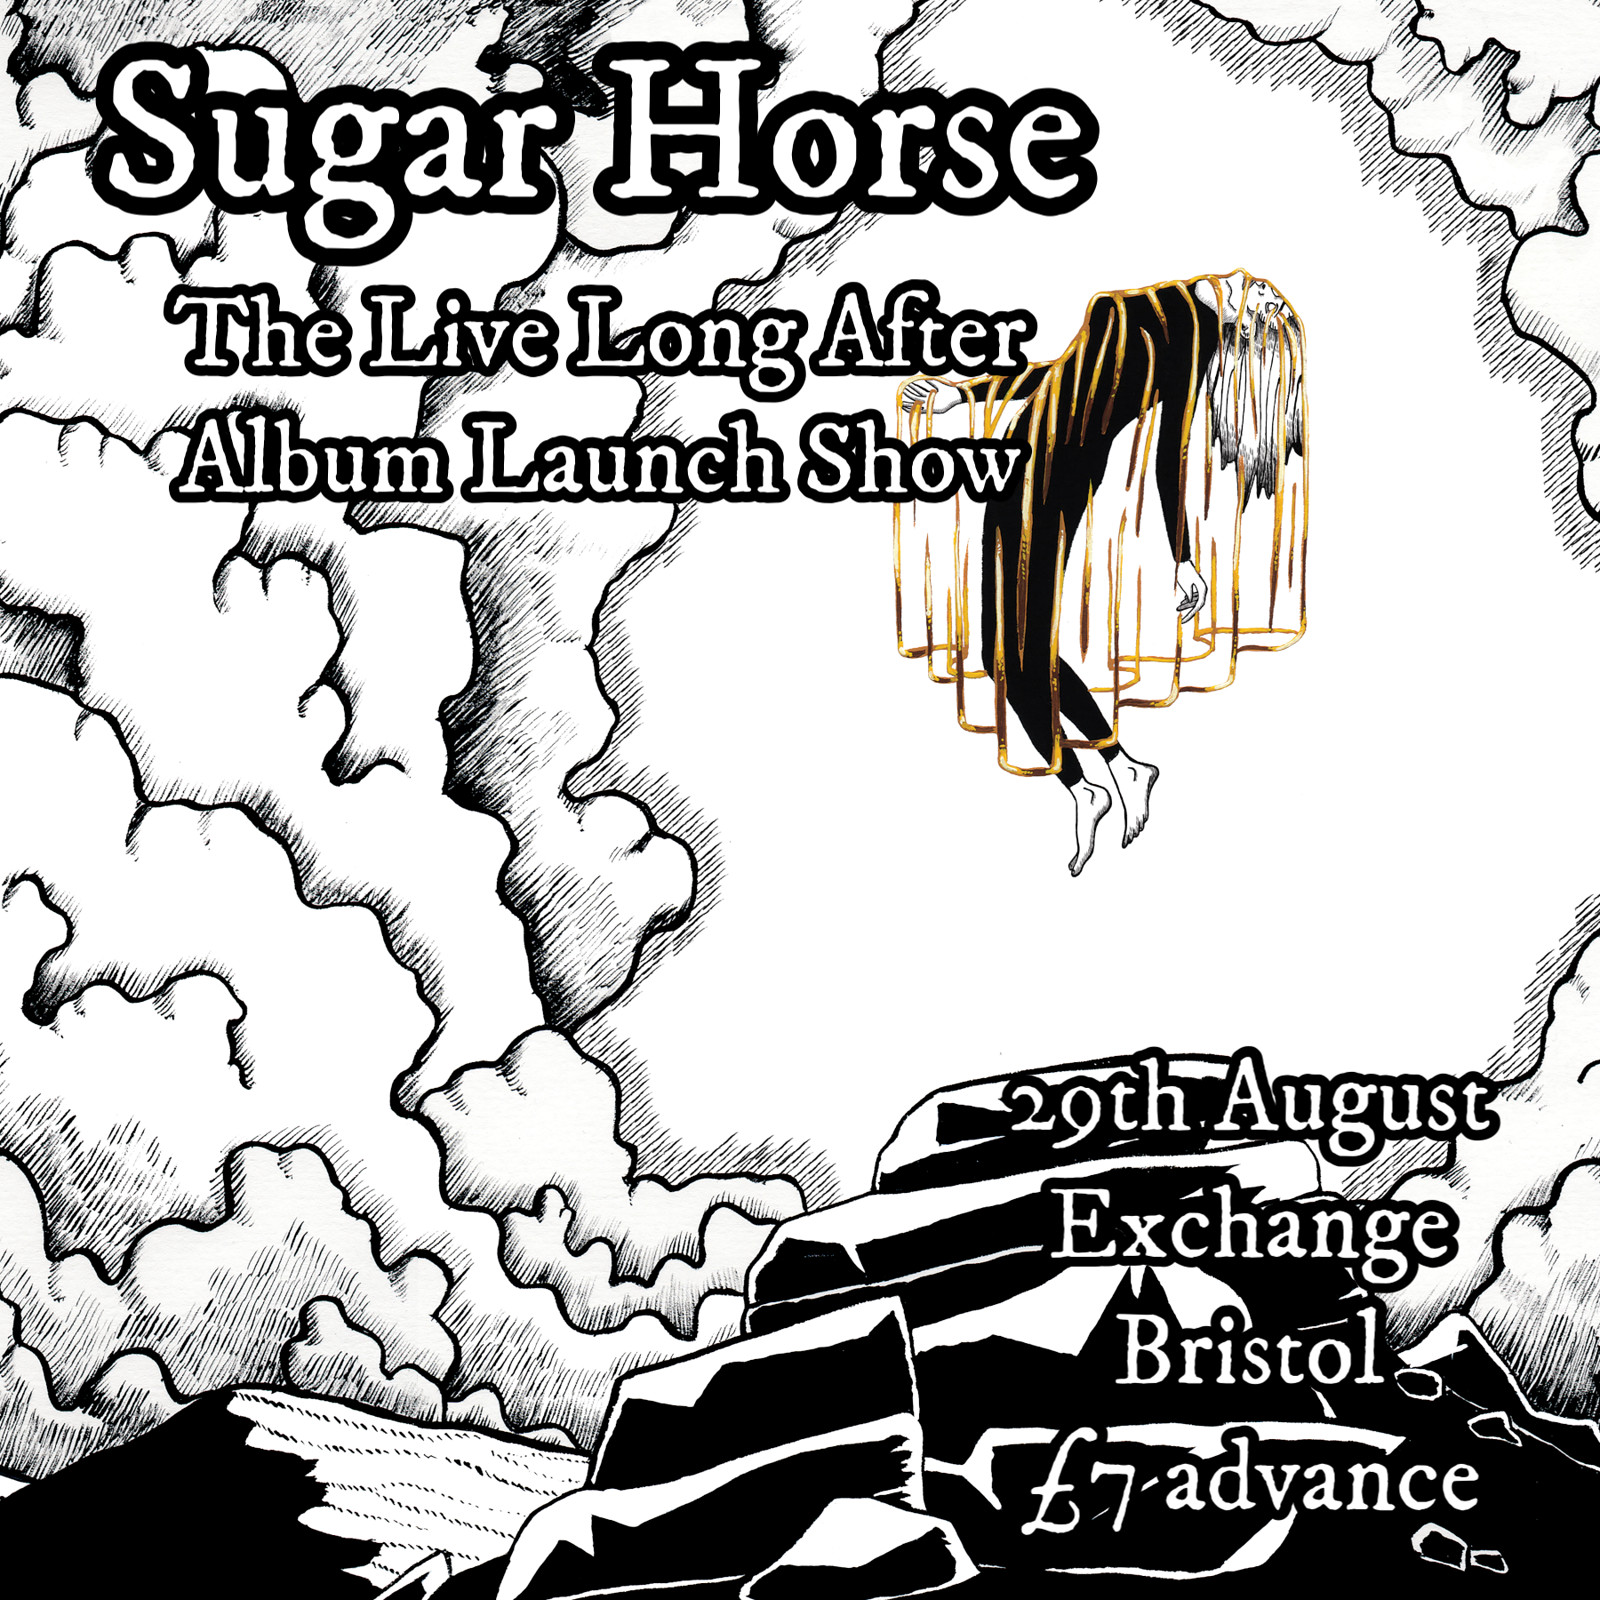 Sugar Horse - Long After launch show at Exchange